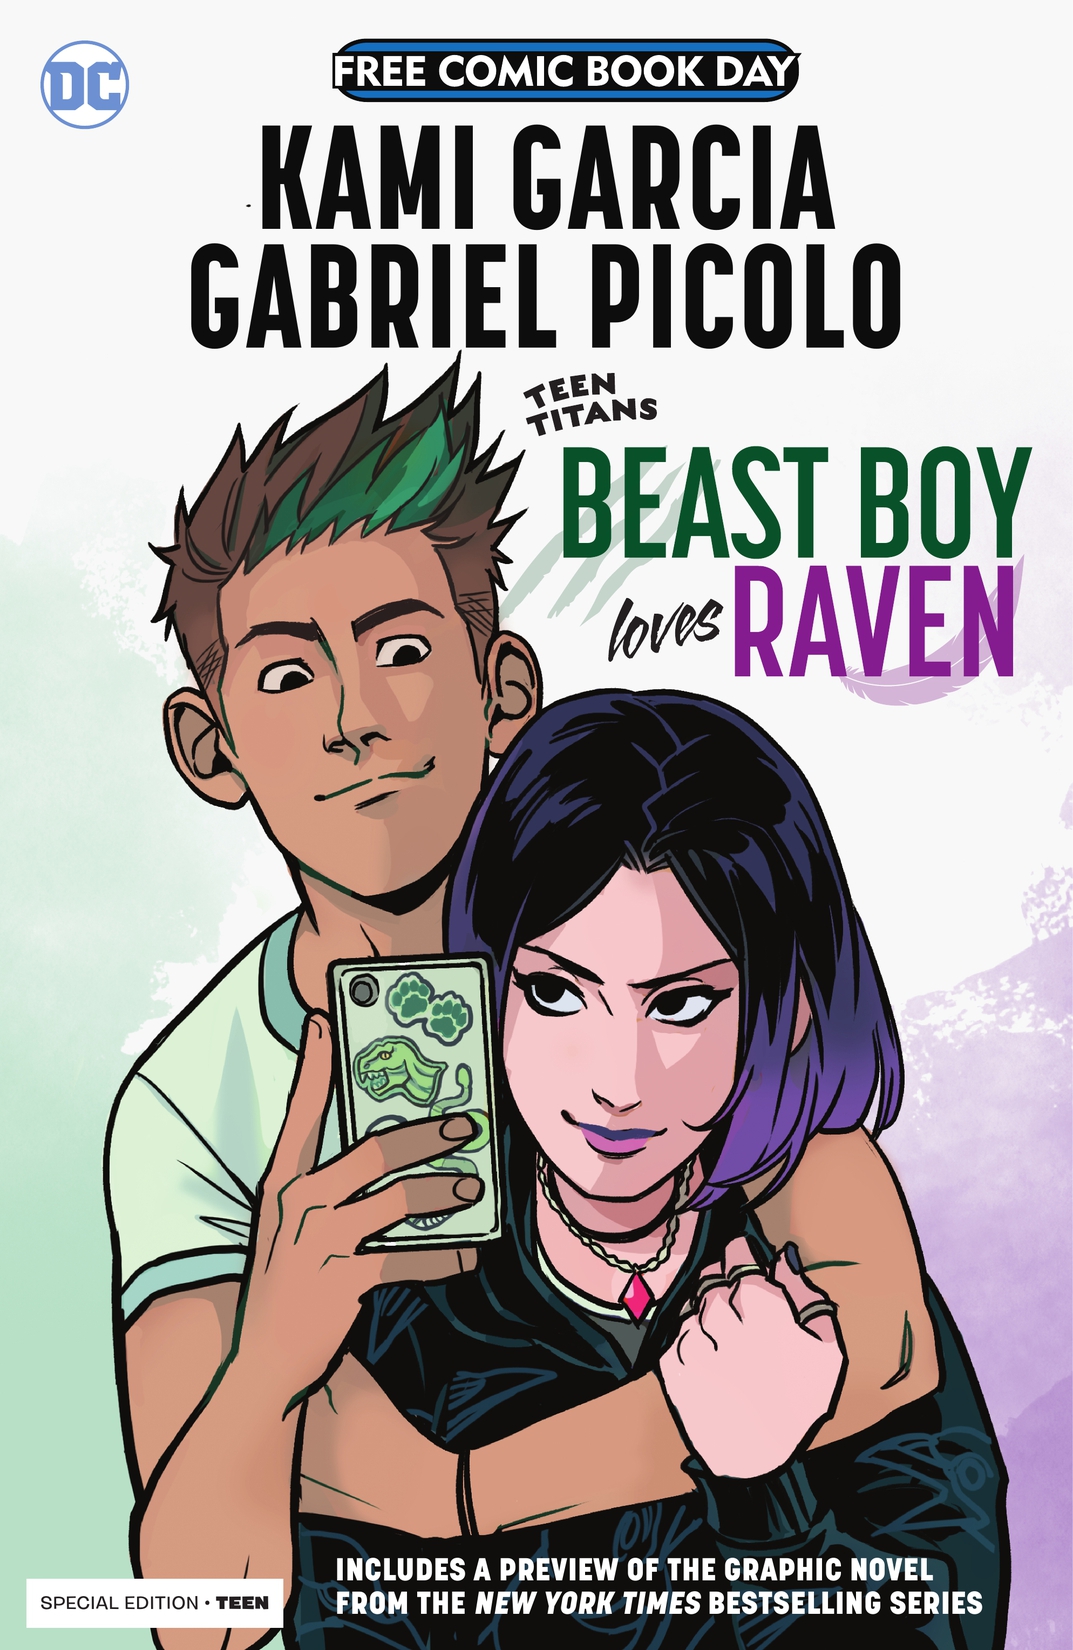 Teen Titans: Beast Boy Loves Raven Special Edition (FCBD) #1 preview images